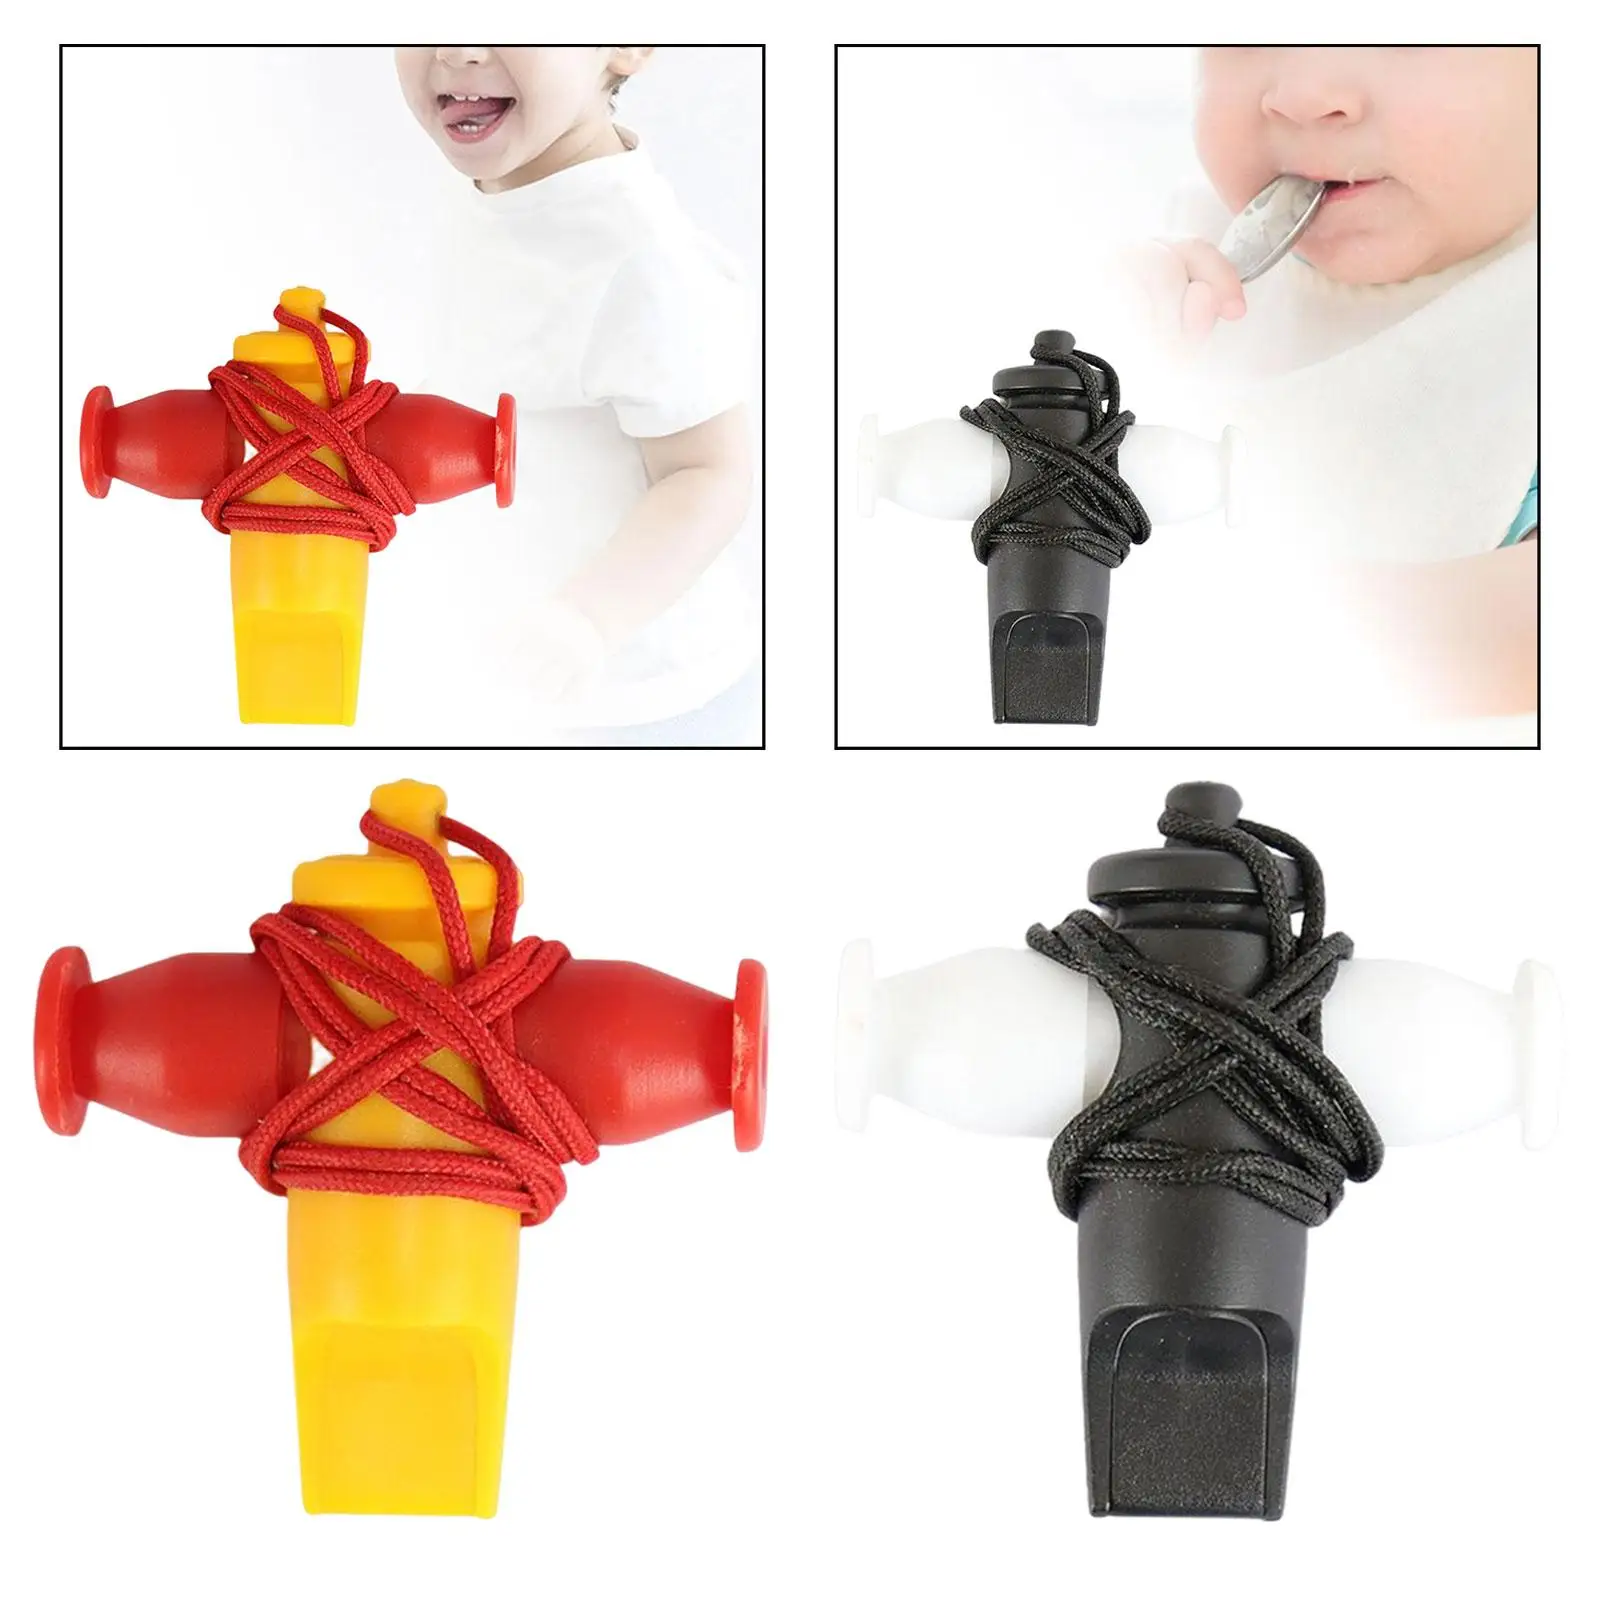 Whistle Musical Instrument Outdoor Whistle for Children Men Referee